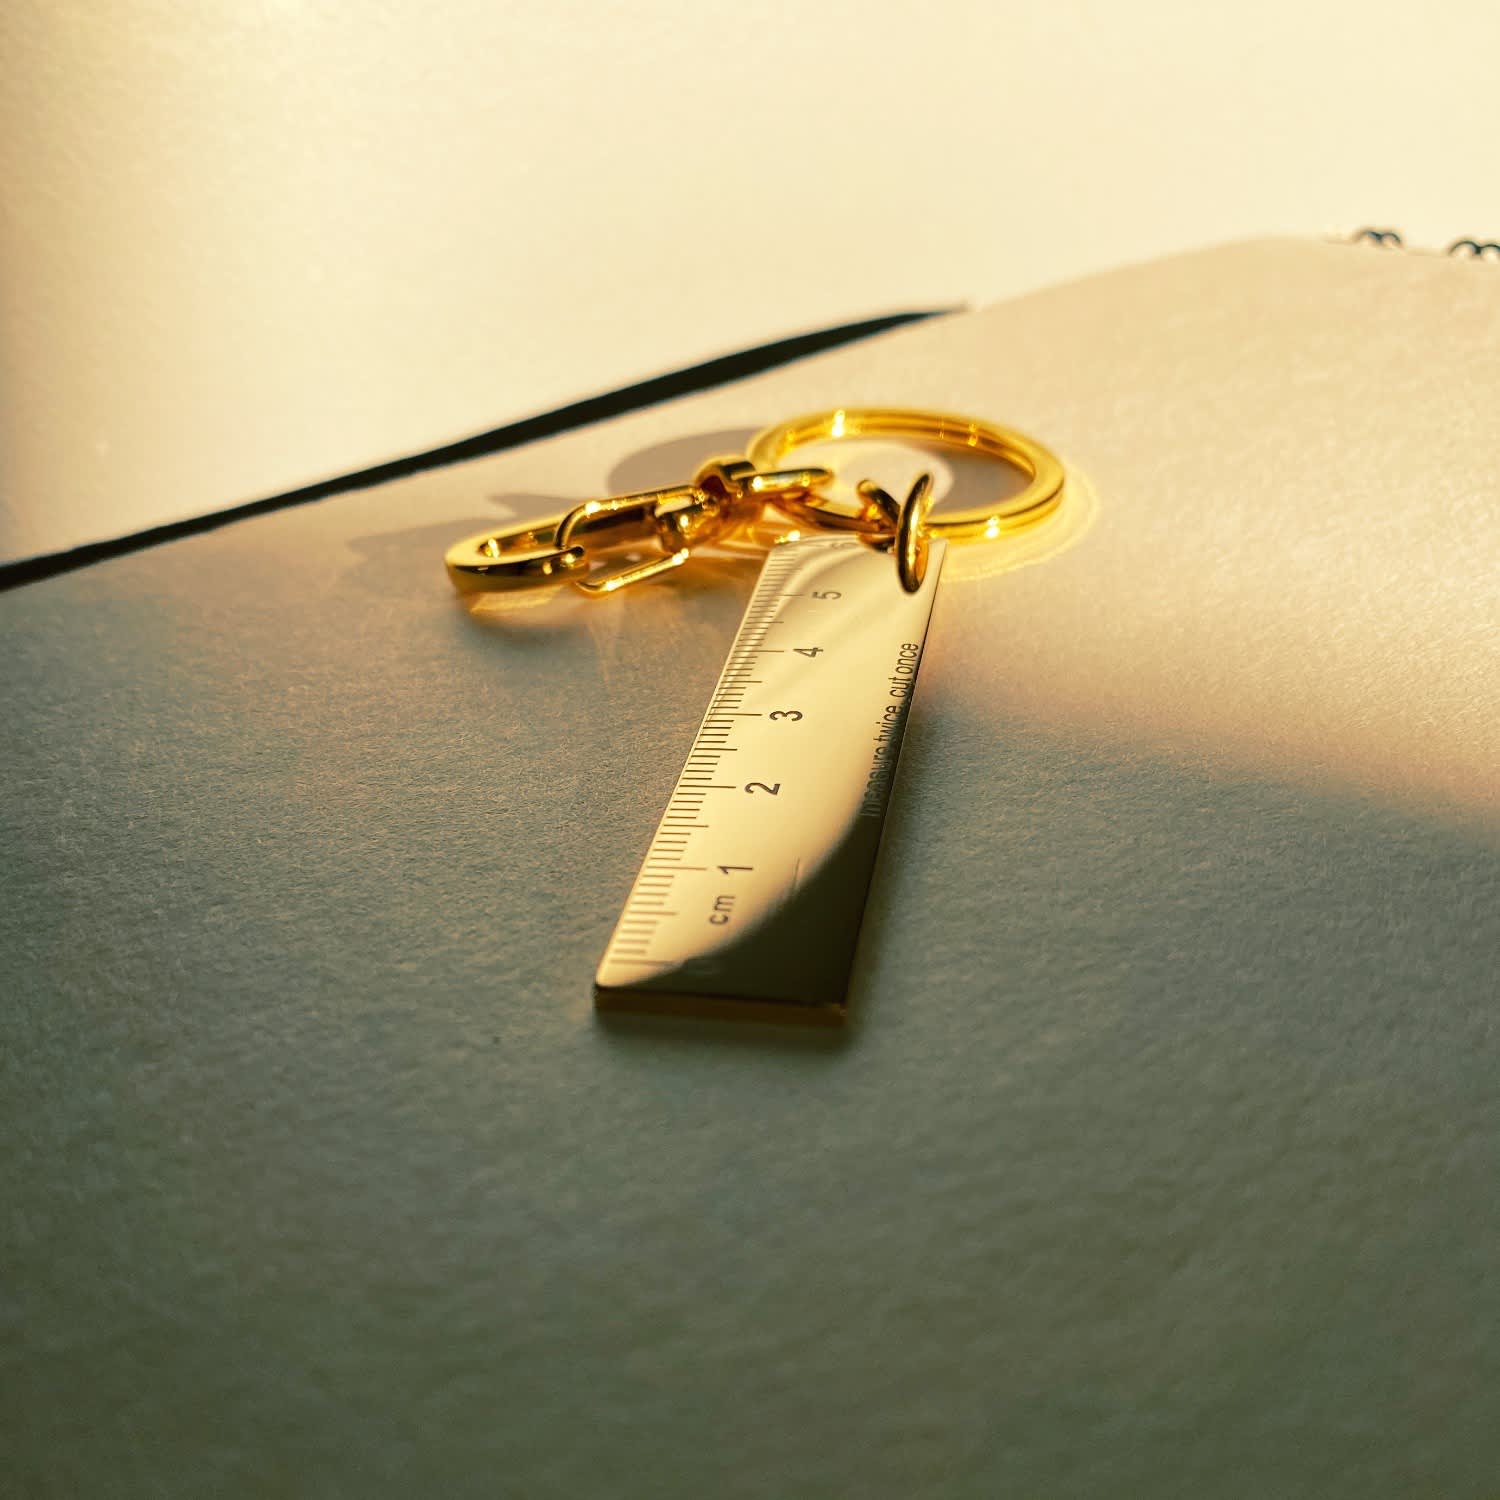 MEIYOUJU AM 2 Pieces Key Chain 3mm Thickened Brass Ruler Small Metal Ruler  Keychain Decoration Gold Bar Key Ring Gold Straight Ruler Metal Bookmark